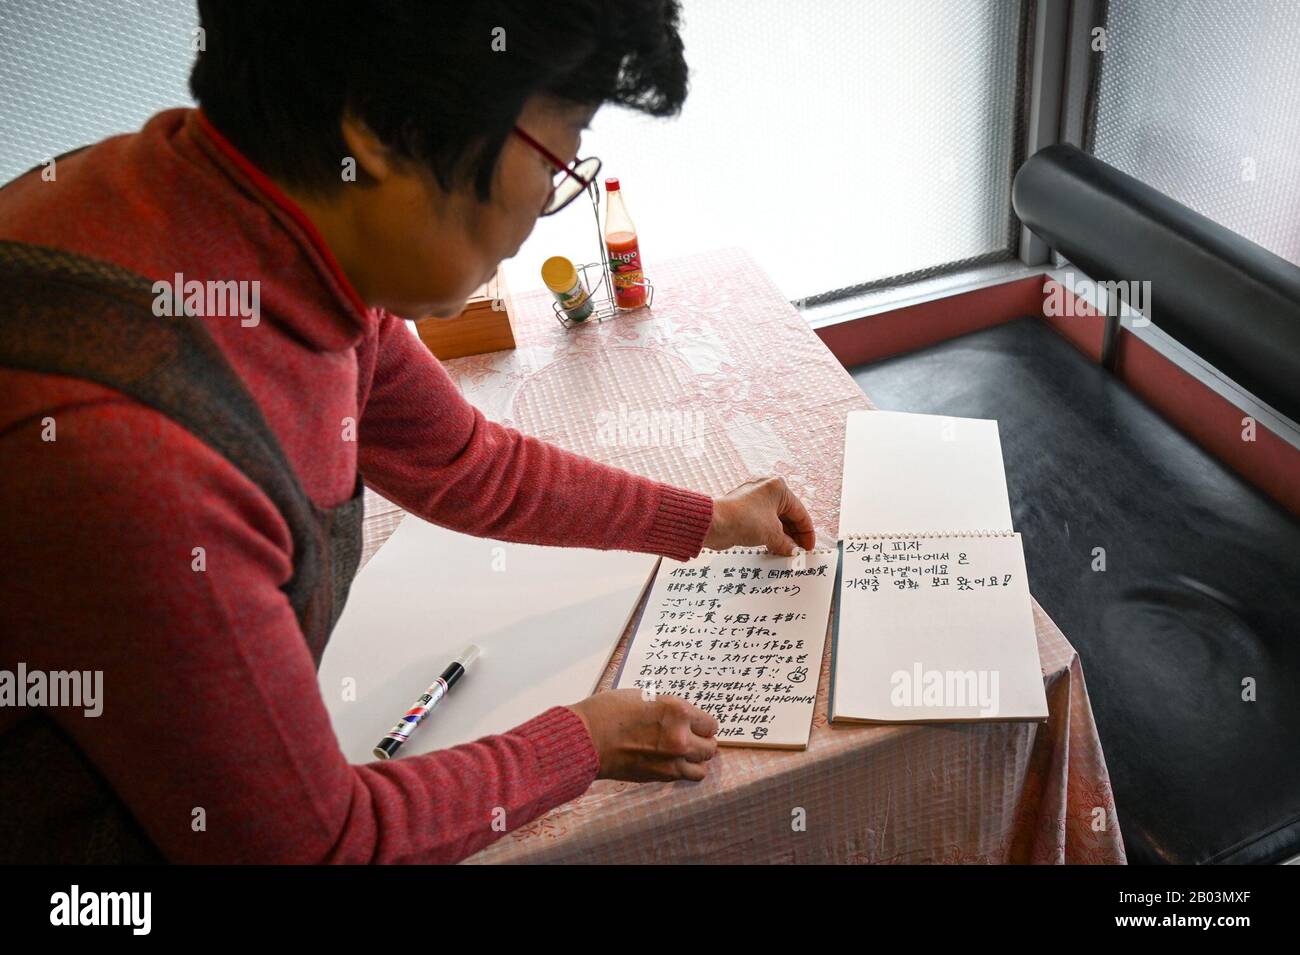 Seoul, South Korea. 18th Feb, 2020. Eom Han-gi, the owner of Pizza Sky in Seoul, shows off the guest book signed by visitors to her restaurant on Saturday, February 15, 2020. The pizza shop has become a tourist destination since its appearance in the Oscar-winning film 'Parasite' by director Bong Joon-ho. Photo by Thomas Maresca/UPI Credit: UPI/Alamy Live News Stock Photo